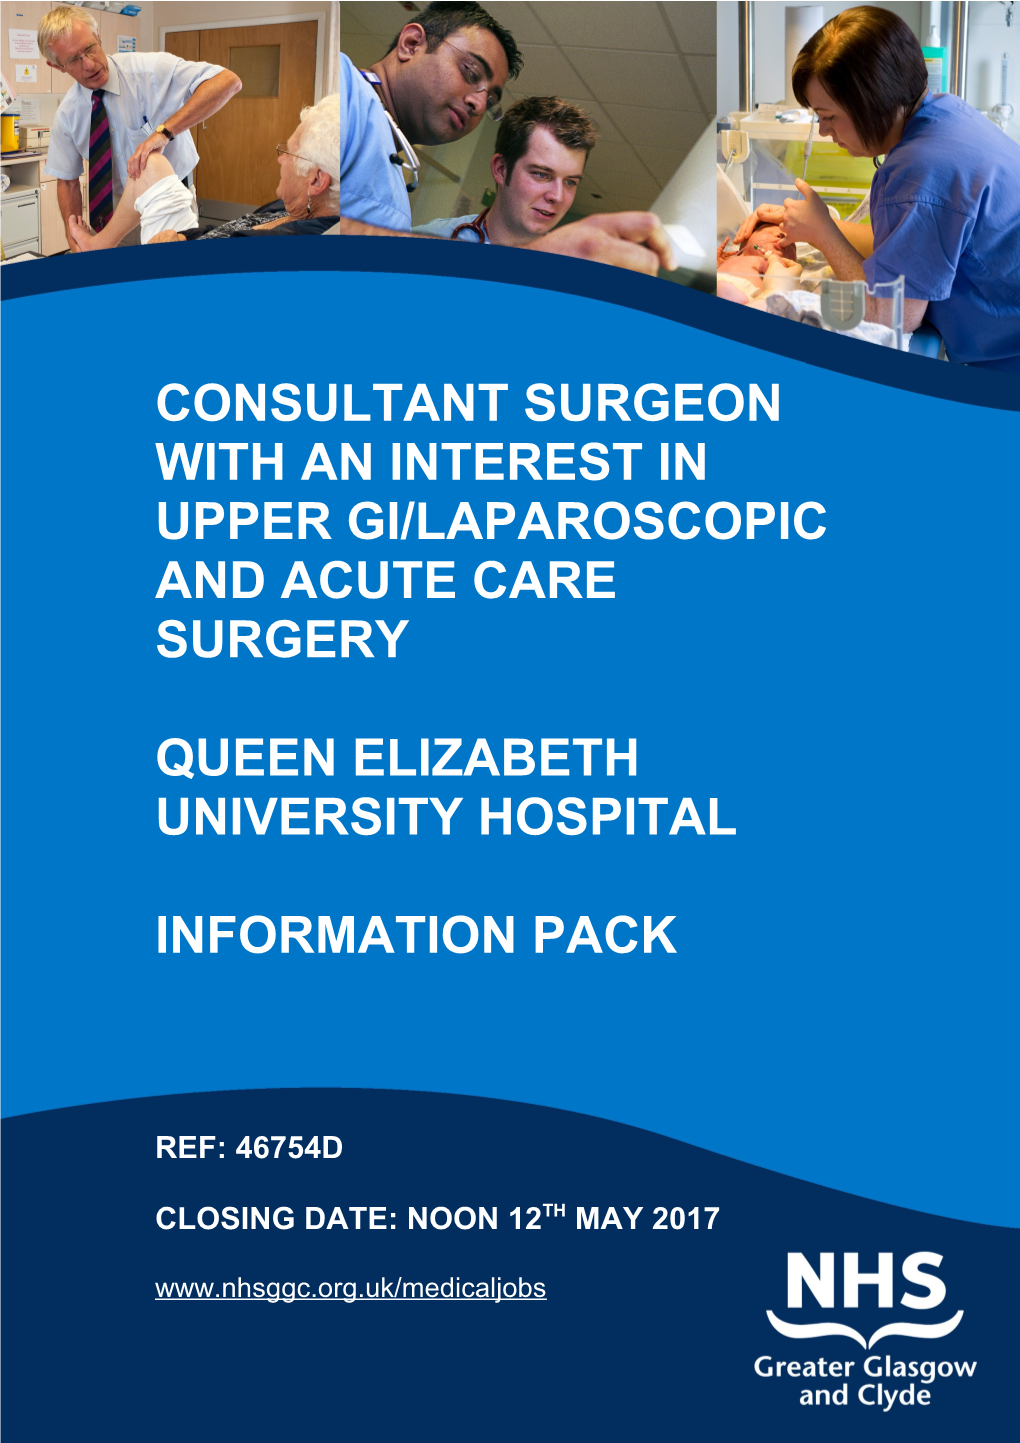 Consultant Surgeon with an Interest in Upper Gi/Laparoscopic and Acute Care Surgery